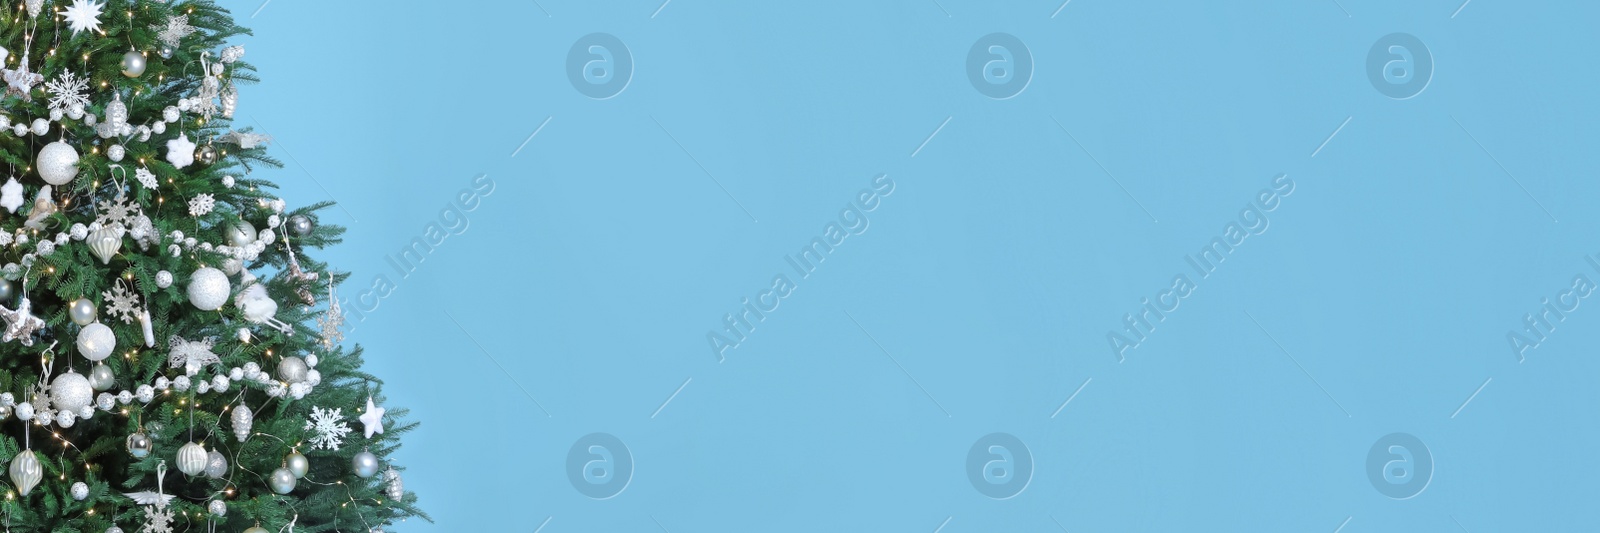 Image of Beautifully decorated Christmas tree on light blue background, space for text. Banner design